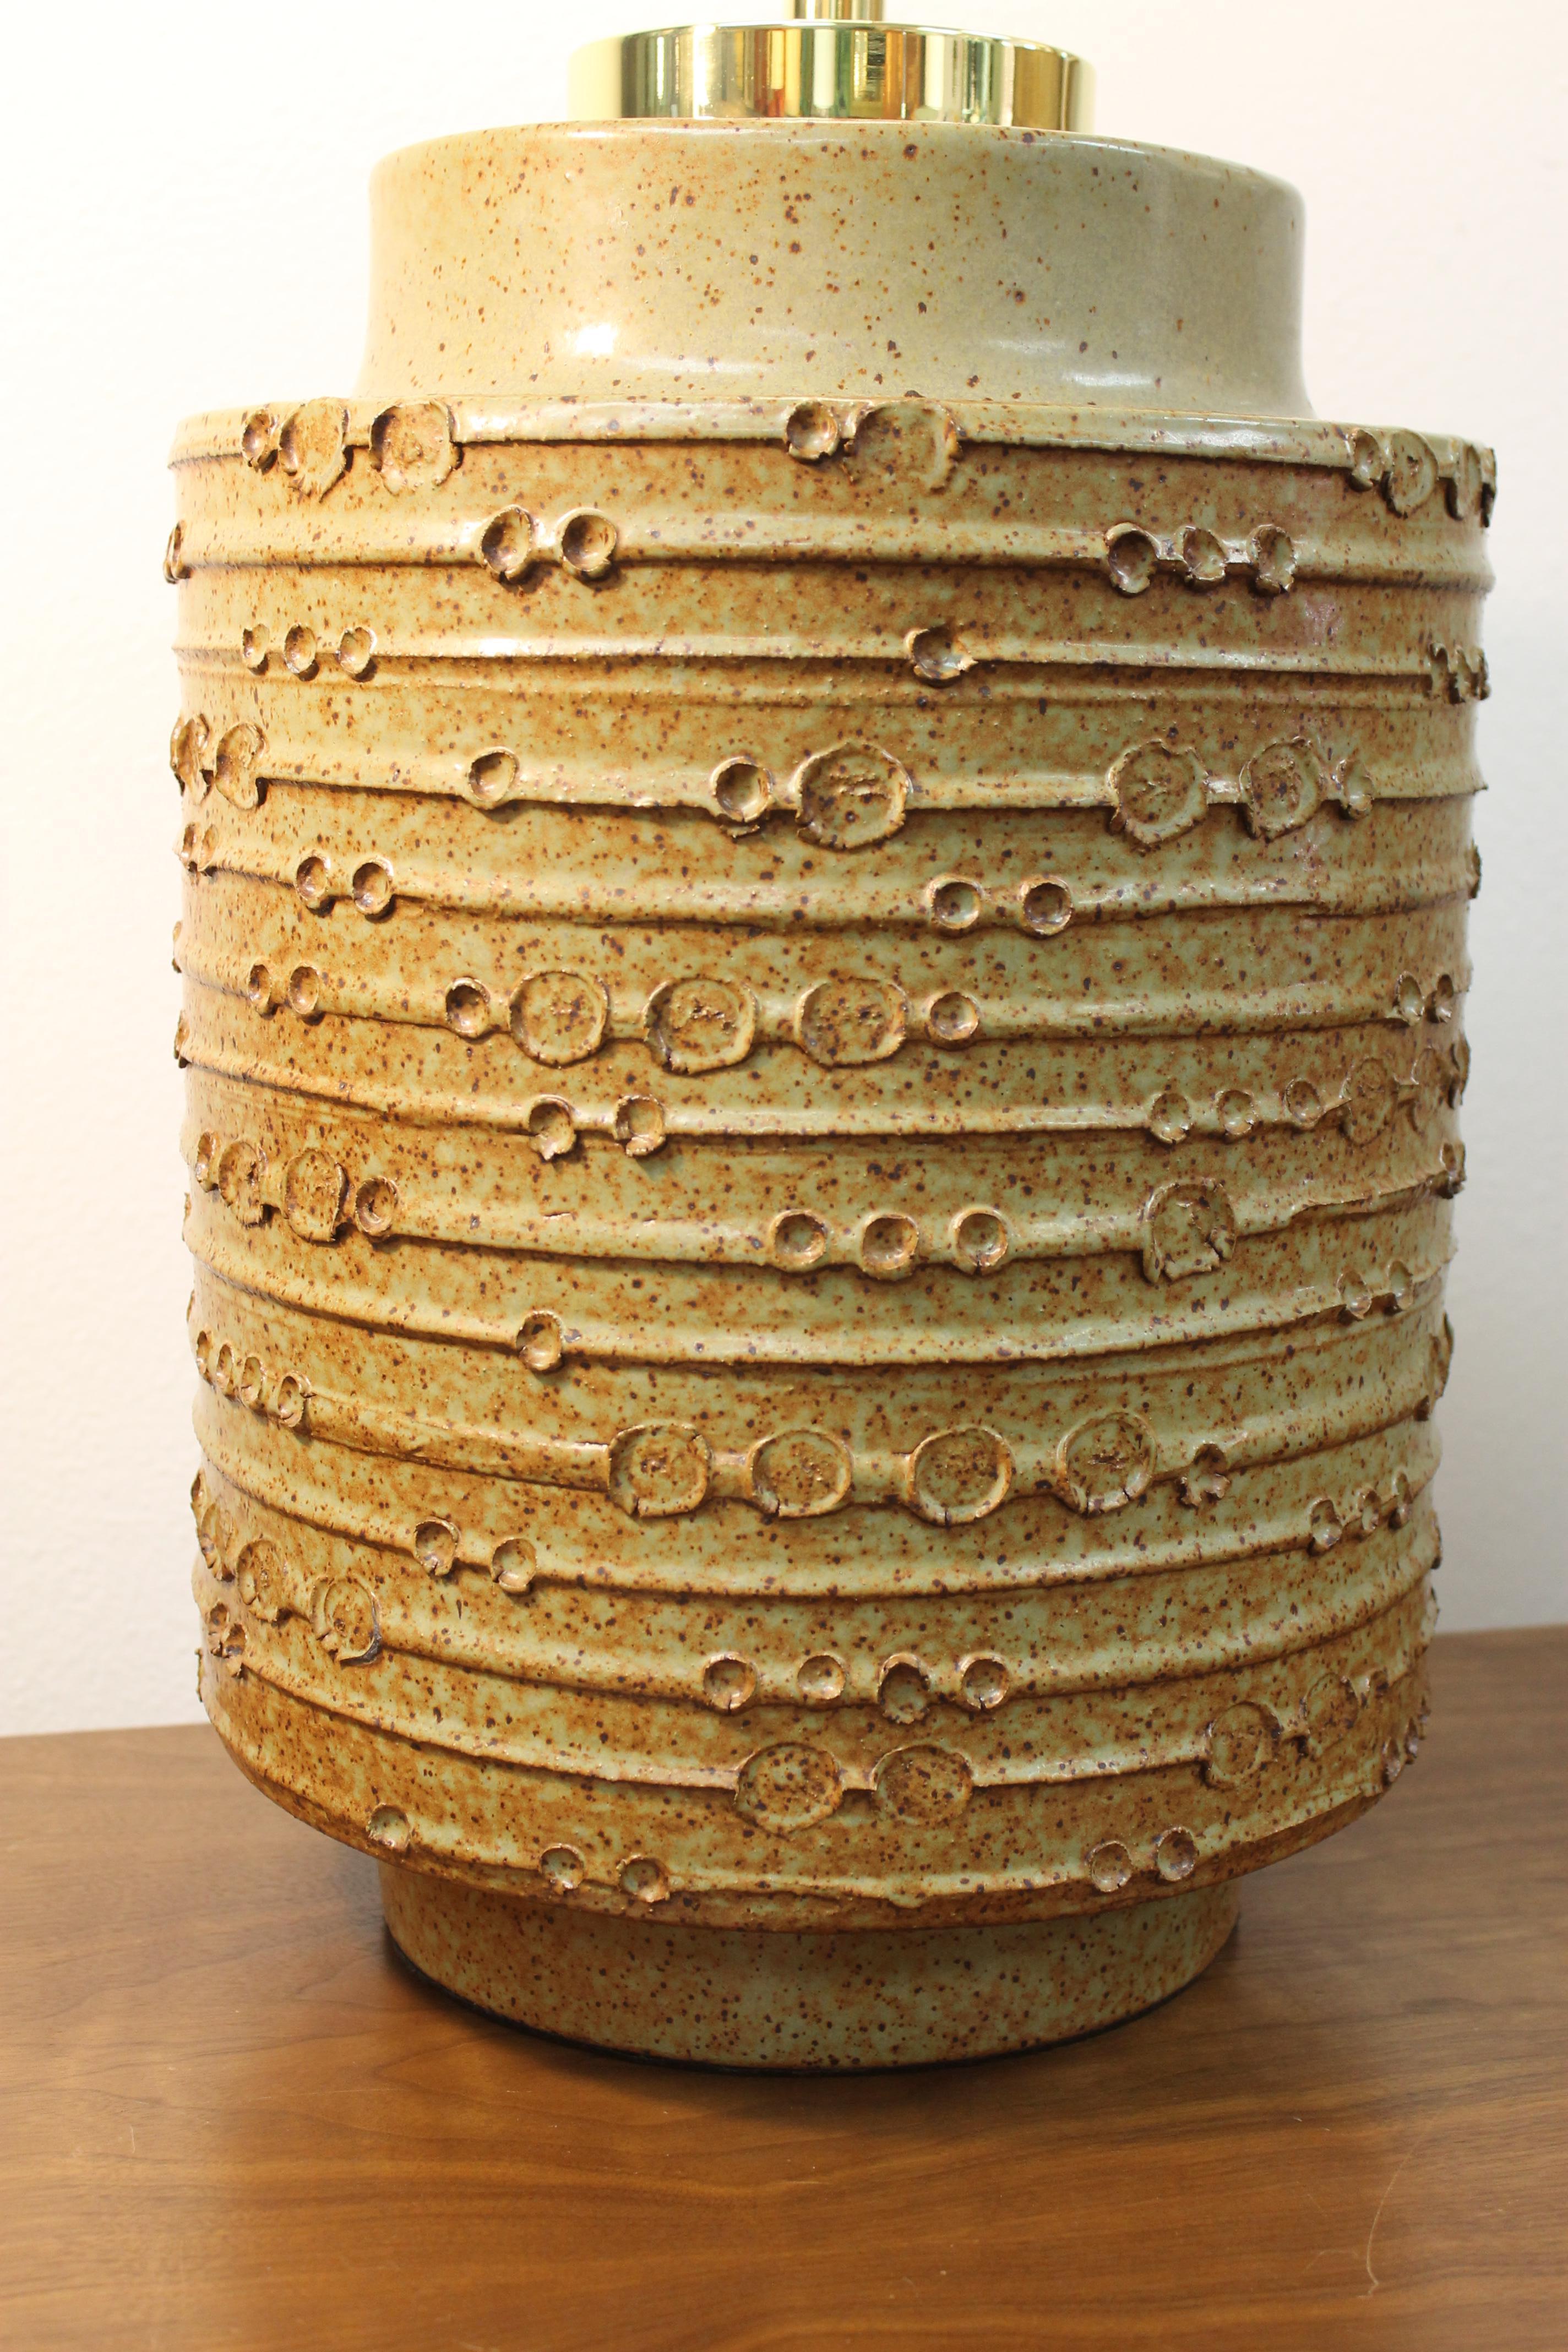 Architectural Pottery Pro/Artisan ceramic lamp by David Cressey. Lamp is 13” diameter and 22” high from base to the bottom of socket. Lamp has been professionally rewired for 3-way light bulbs. Lamp shade not included.